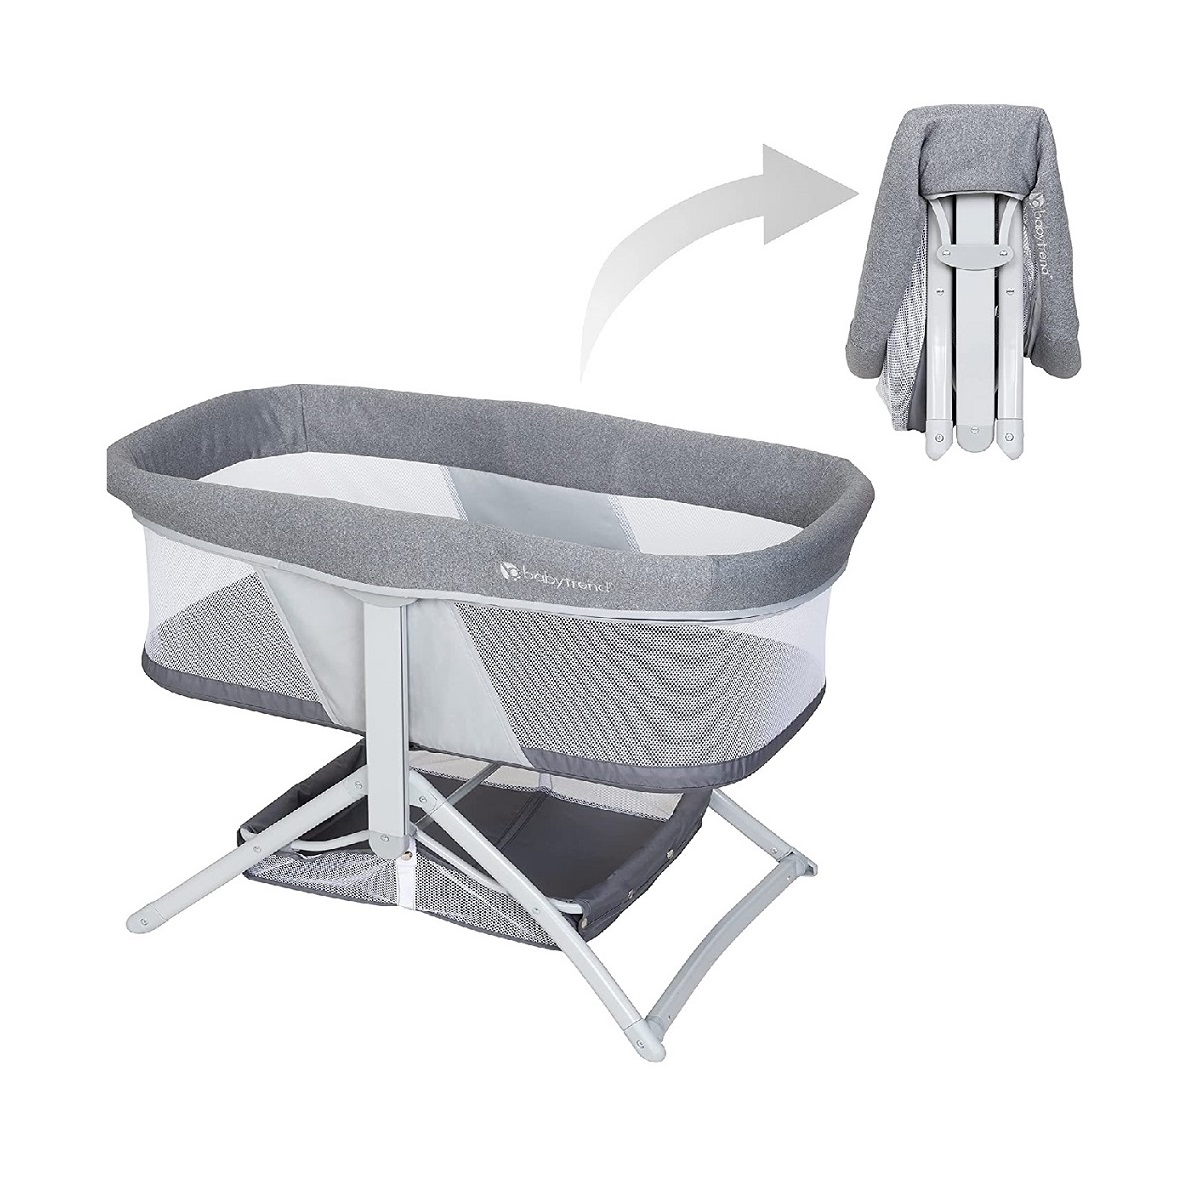 Babytrend Quick-Fold 2-in-1 Rocking Bassinet- Shadow Stone Gray